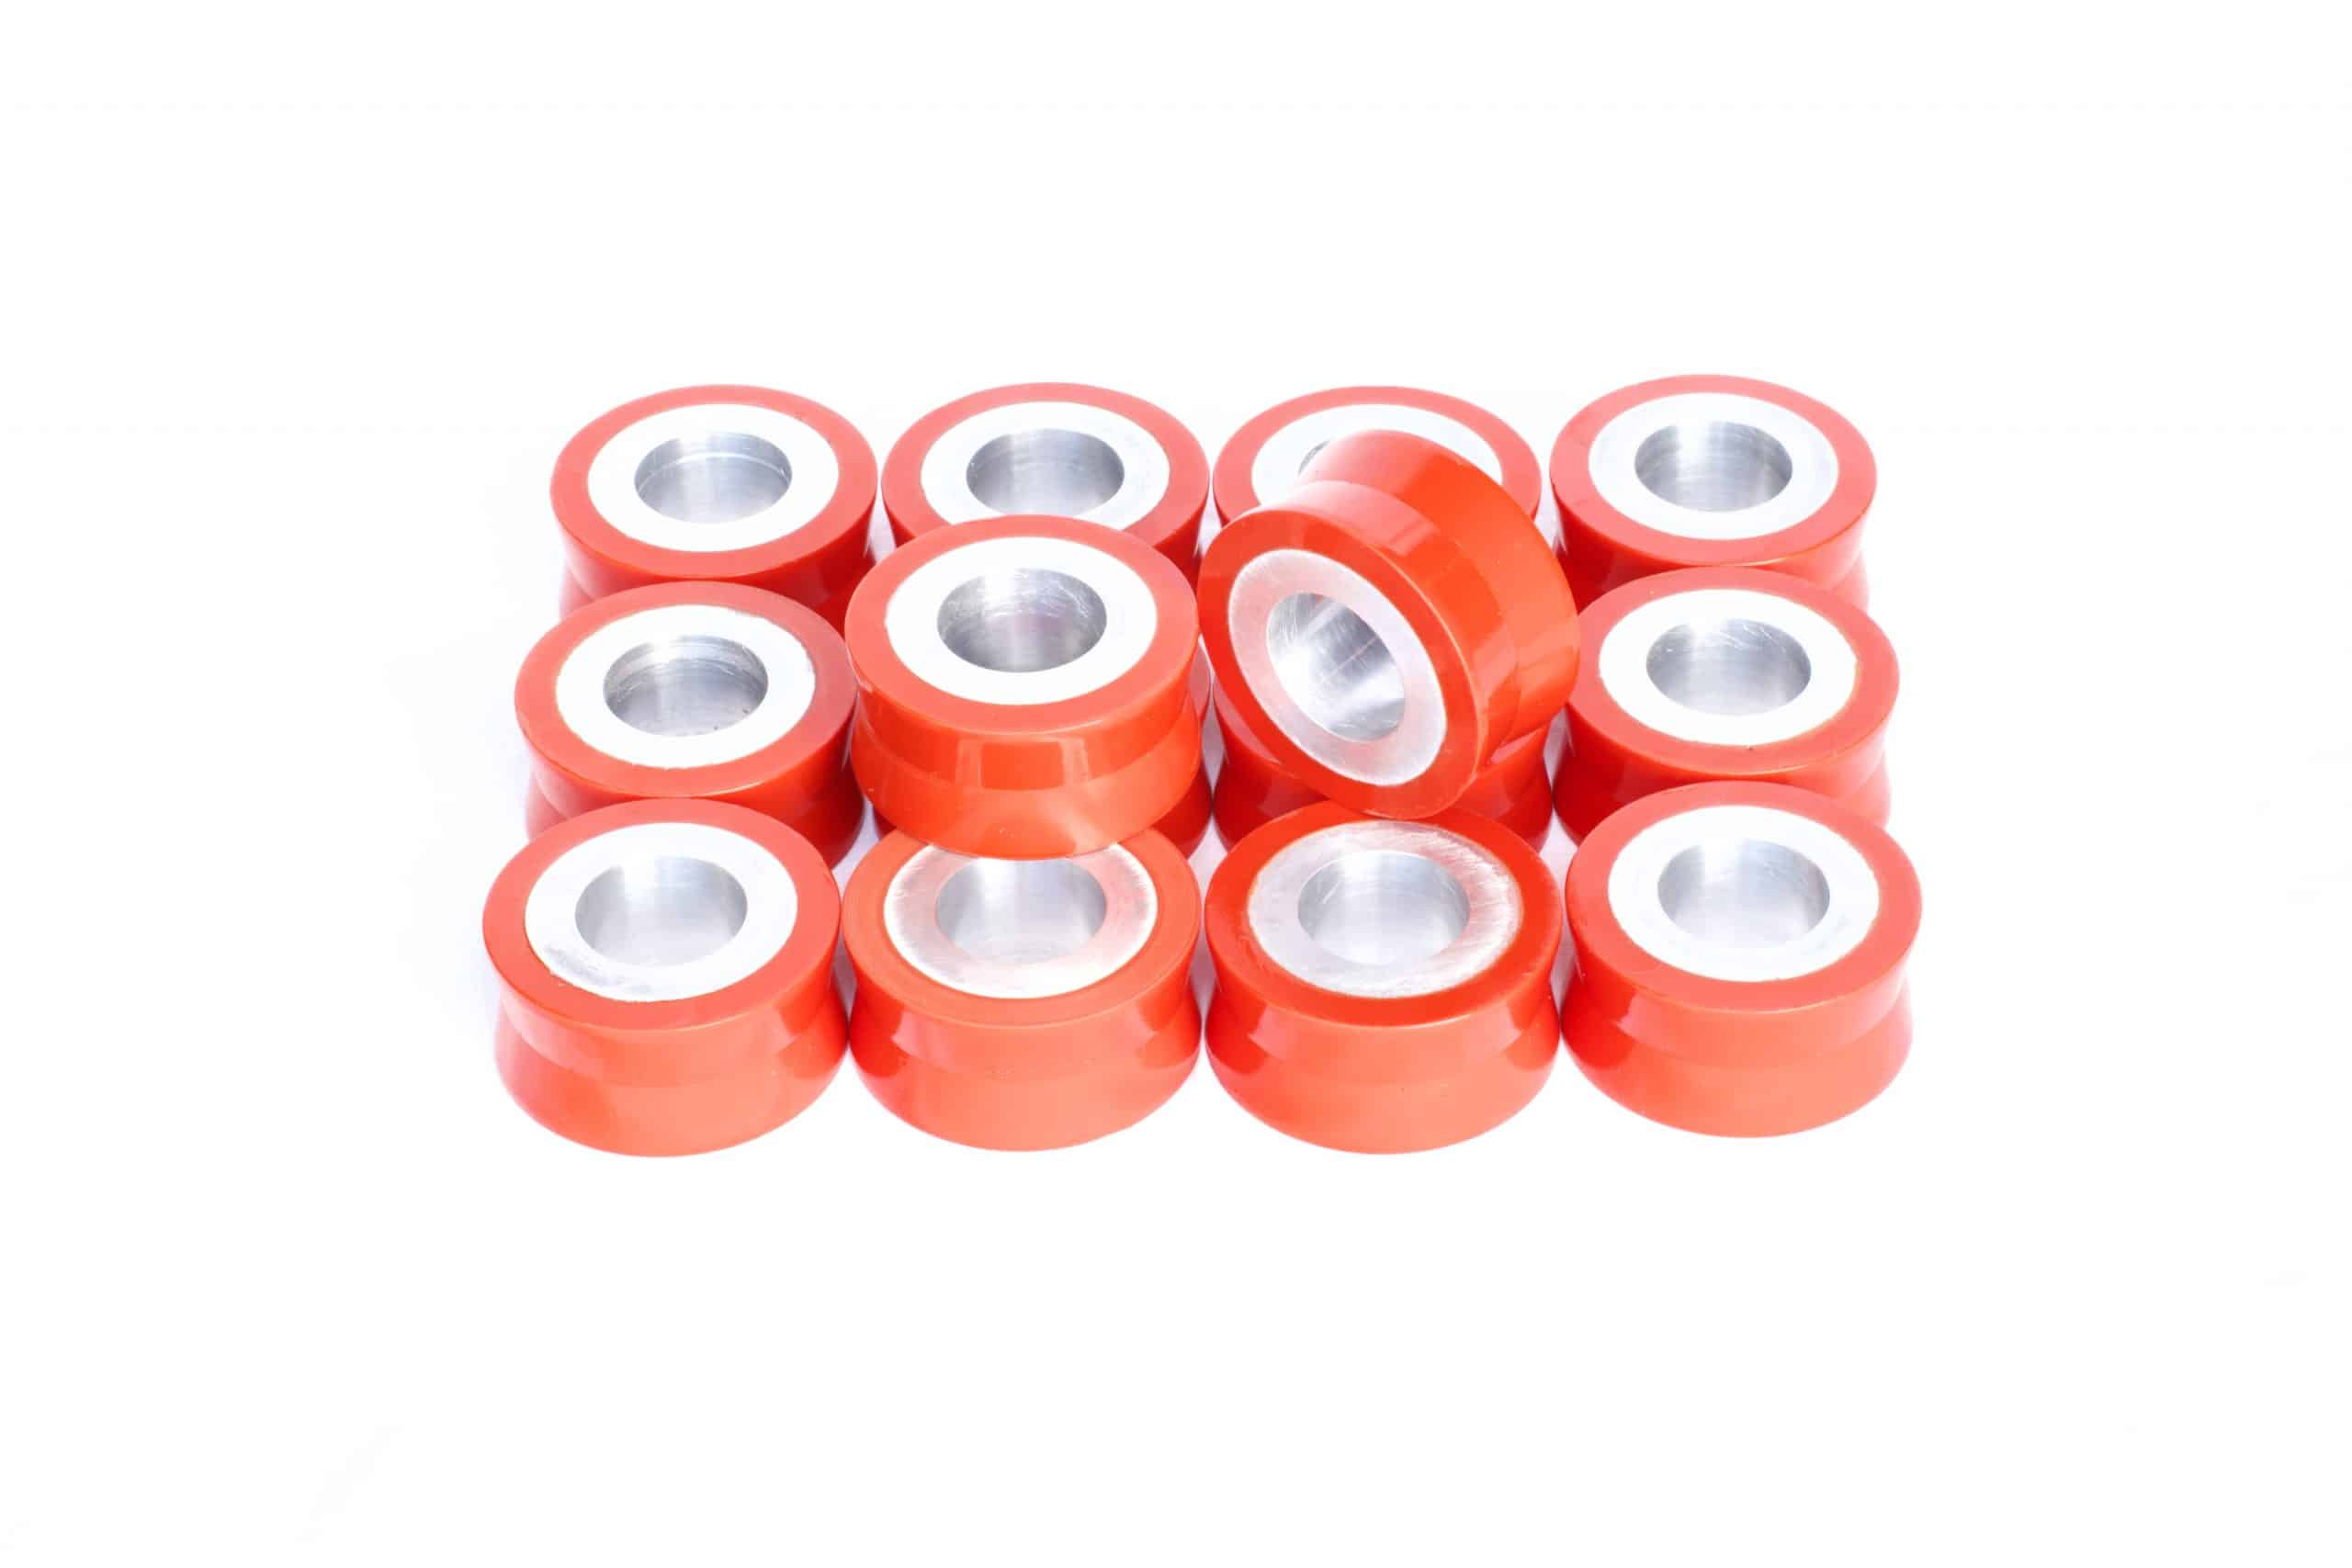 An array of V-shaped polyurethane rollers.